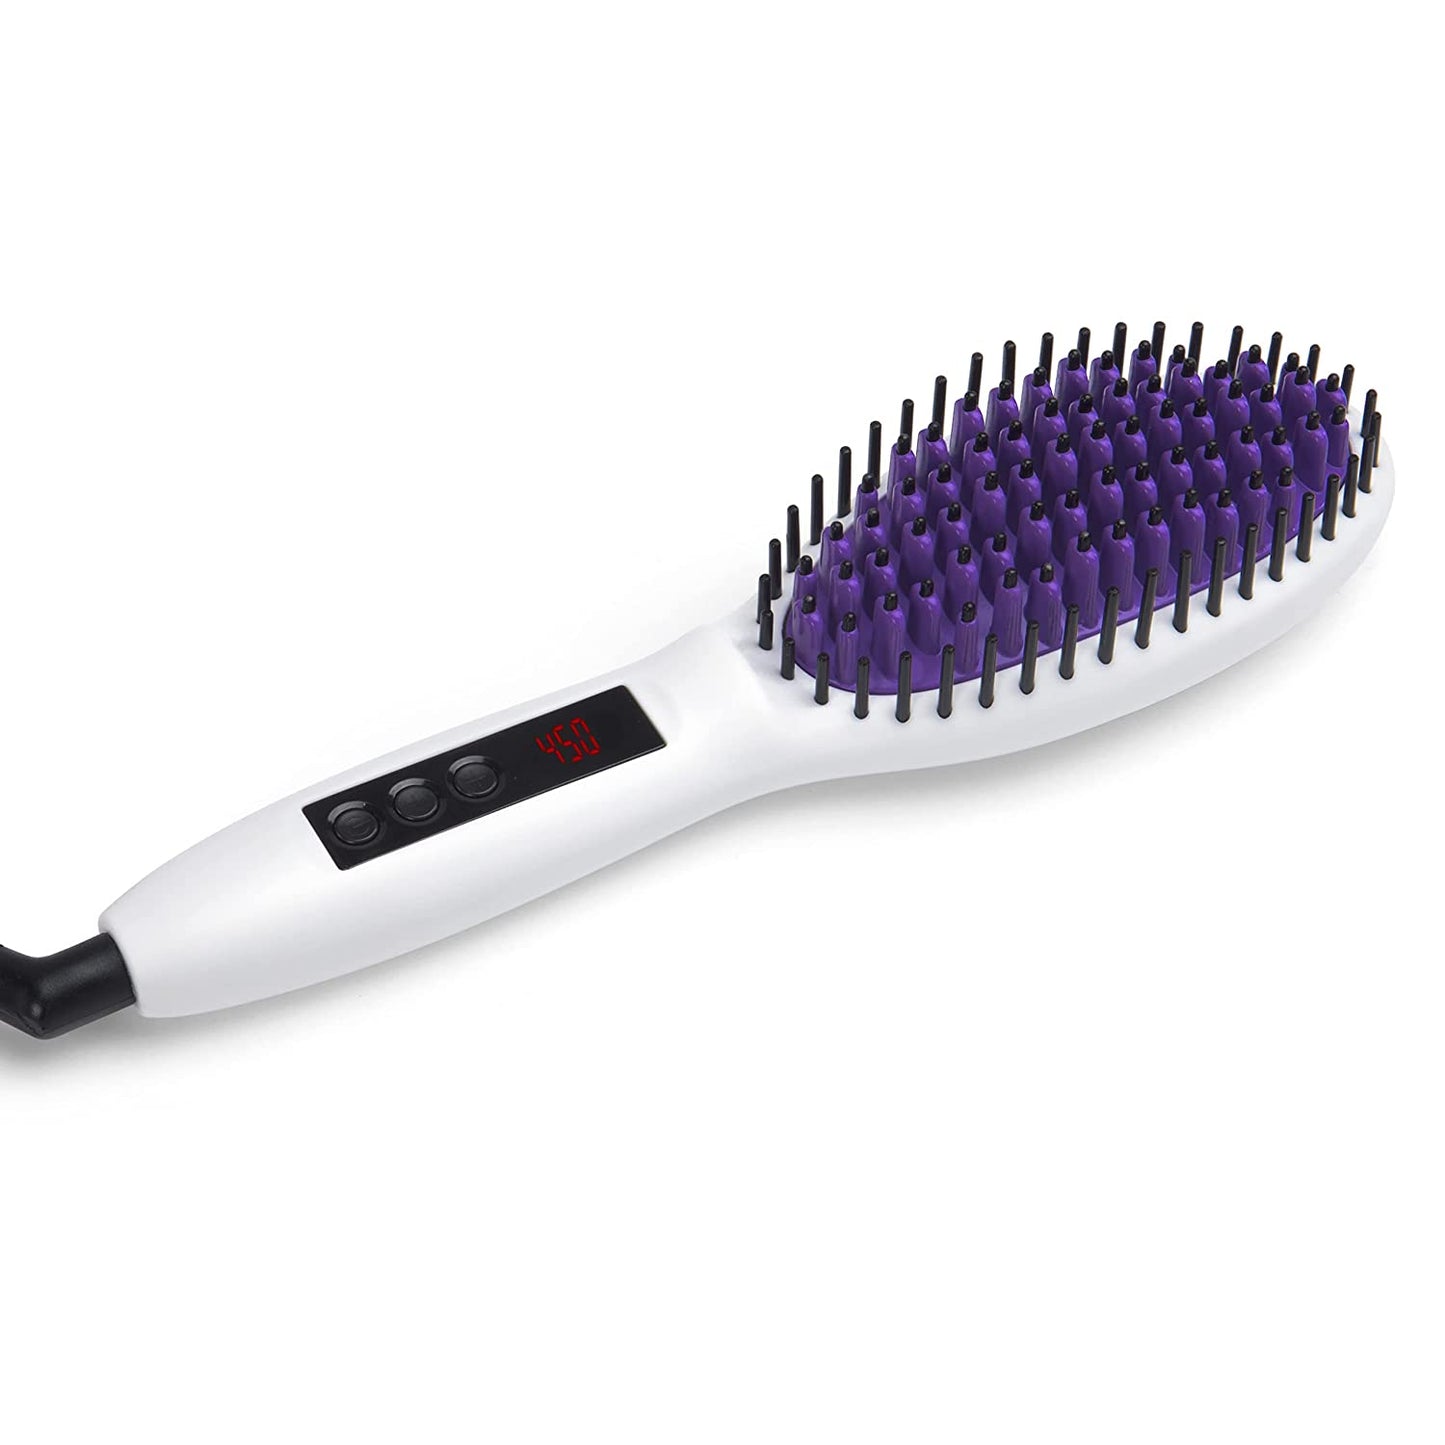 InStyler Straight Up Ceramic Straightening Brush - Detangling Hair Brush Straightener with Powerful Ceramic Heated Plates for Smooth, Frizz-Free Hair - For Thick, Curly & Wavy Hair Types - Hatke